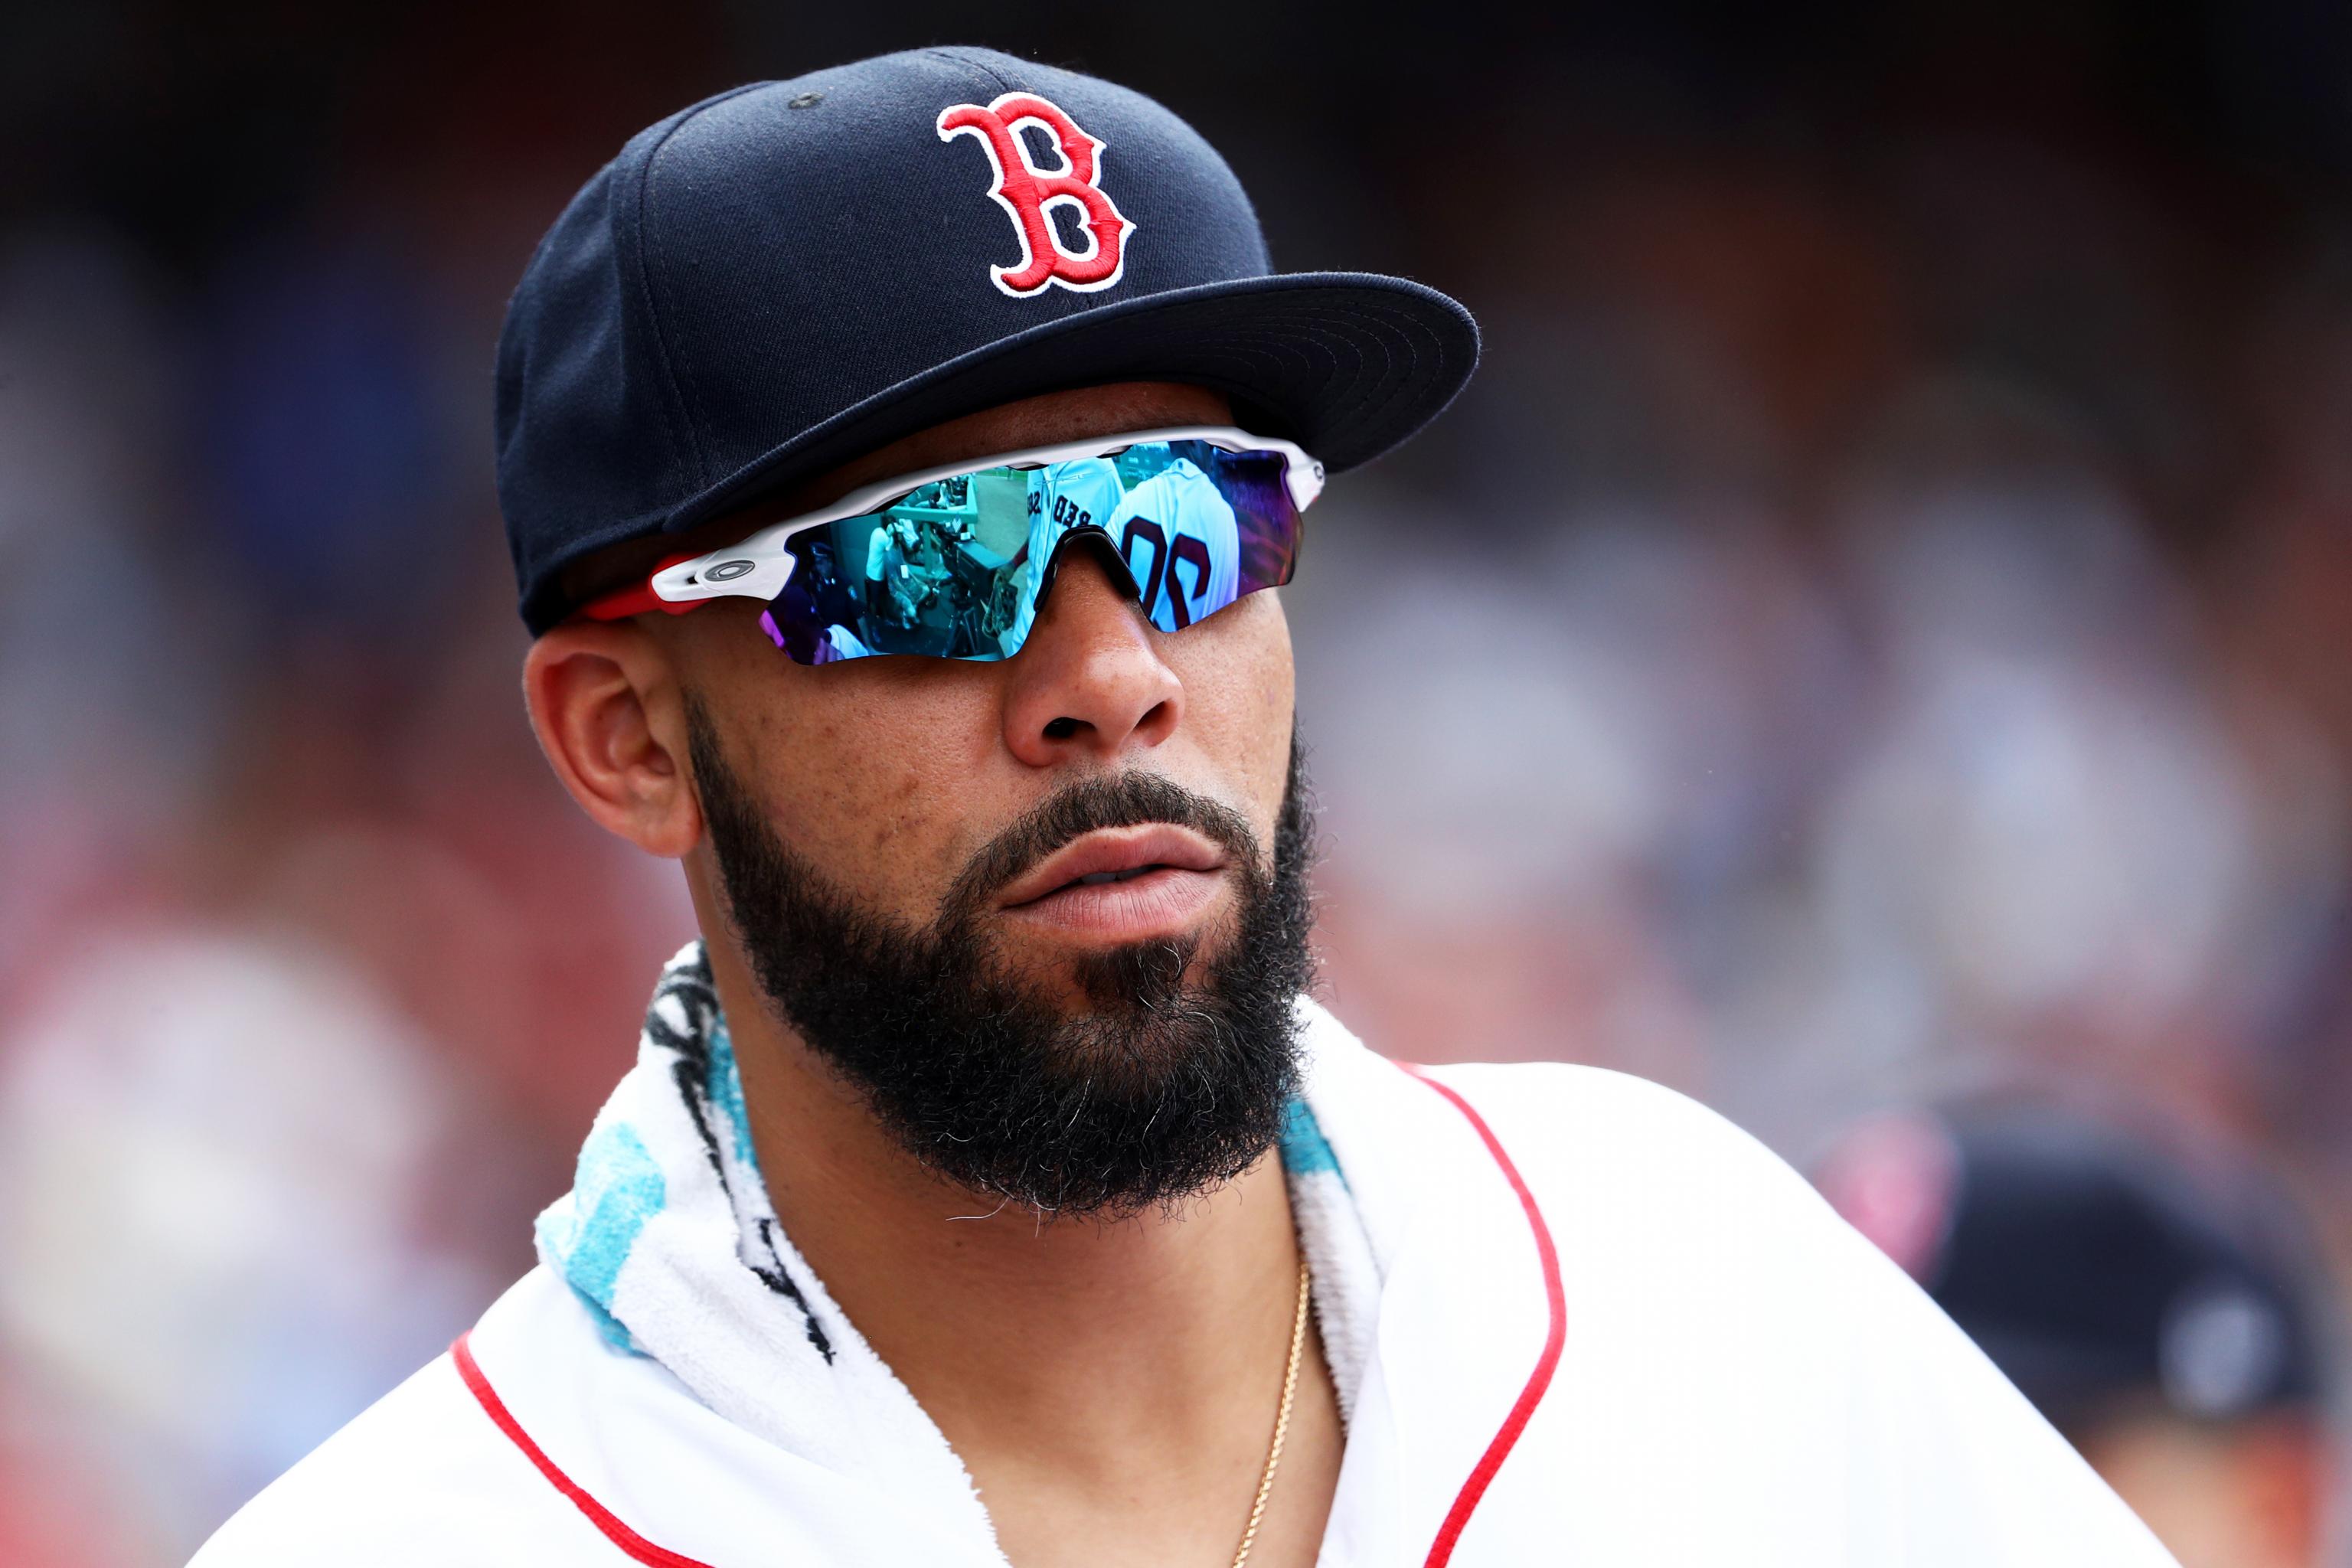 David Price-Dennis Eckersley incident: What happened on Red Sox flight